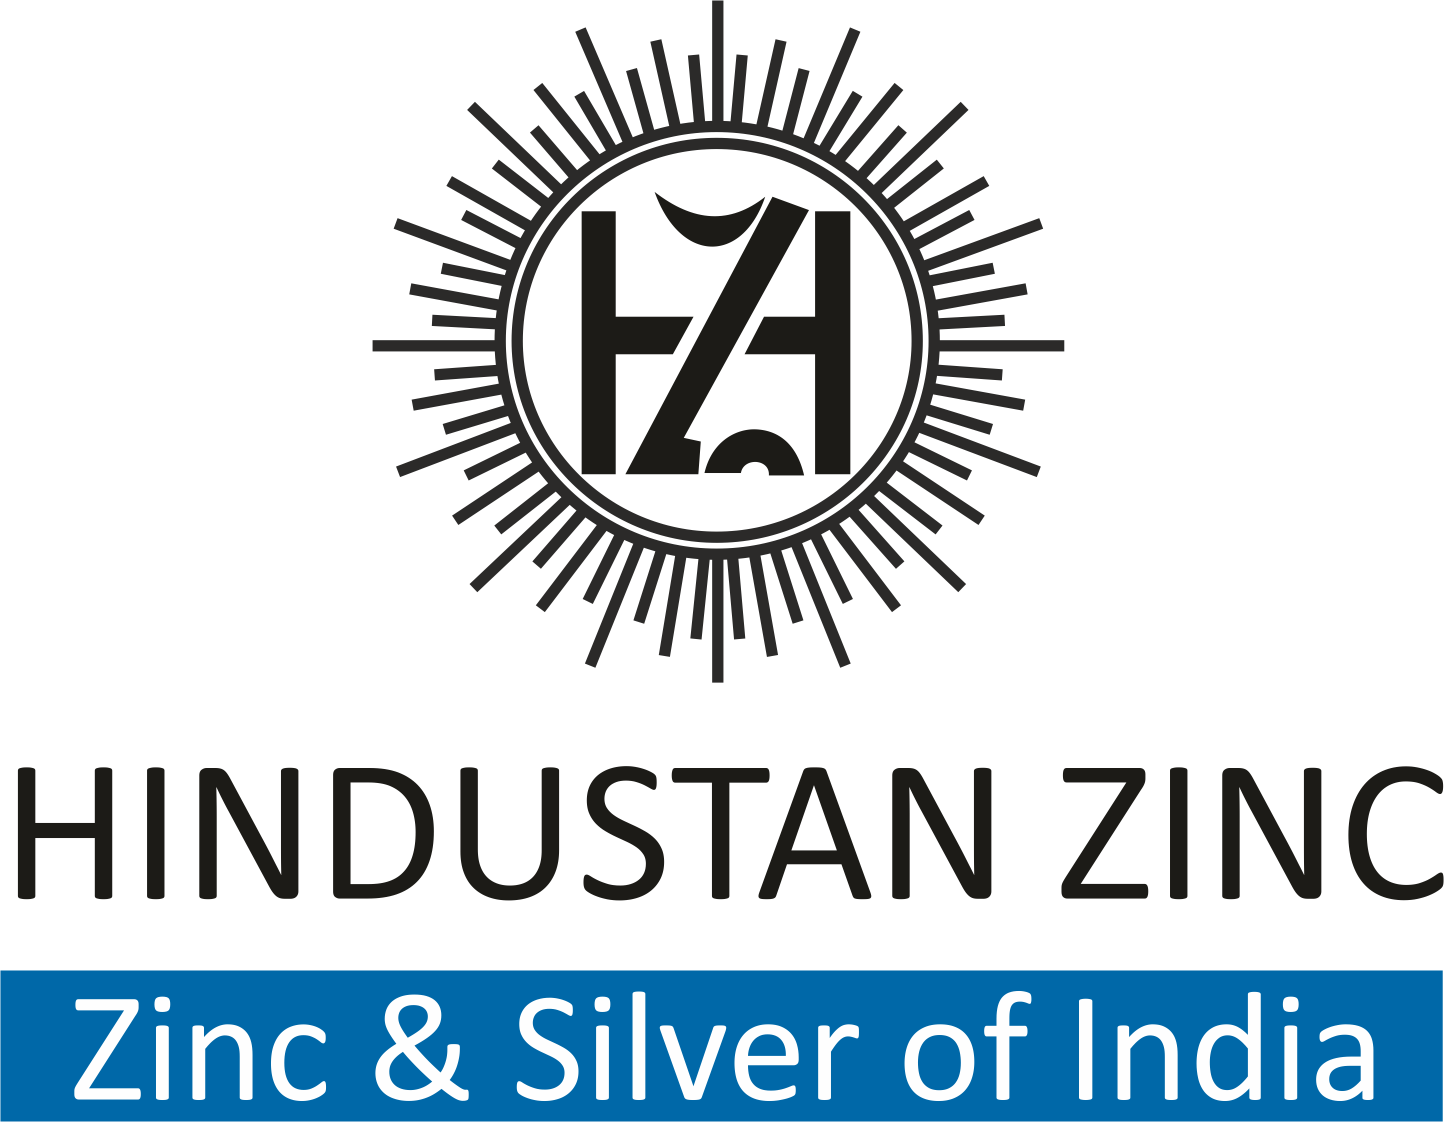 Hindustan Zinc Ranks Among the Top 3 Sustainable Companies Globally in Metal and Mining Sector